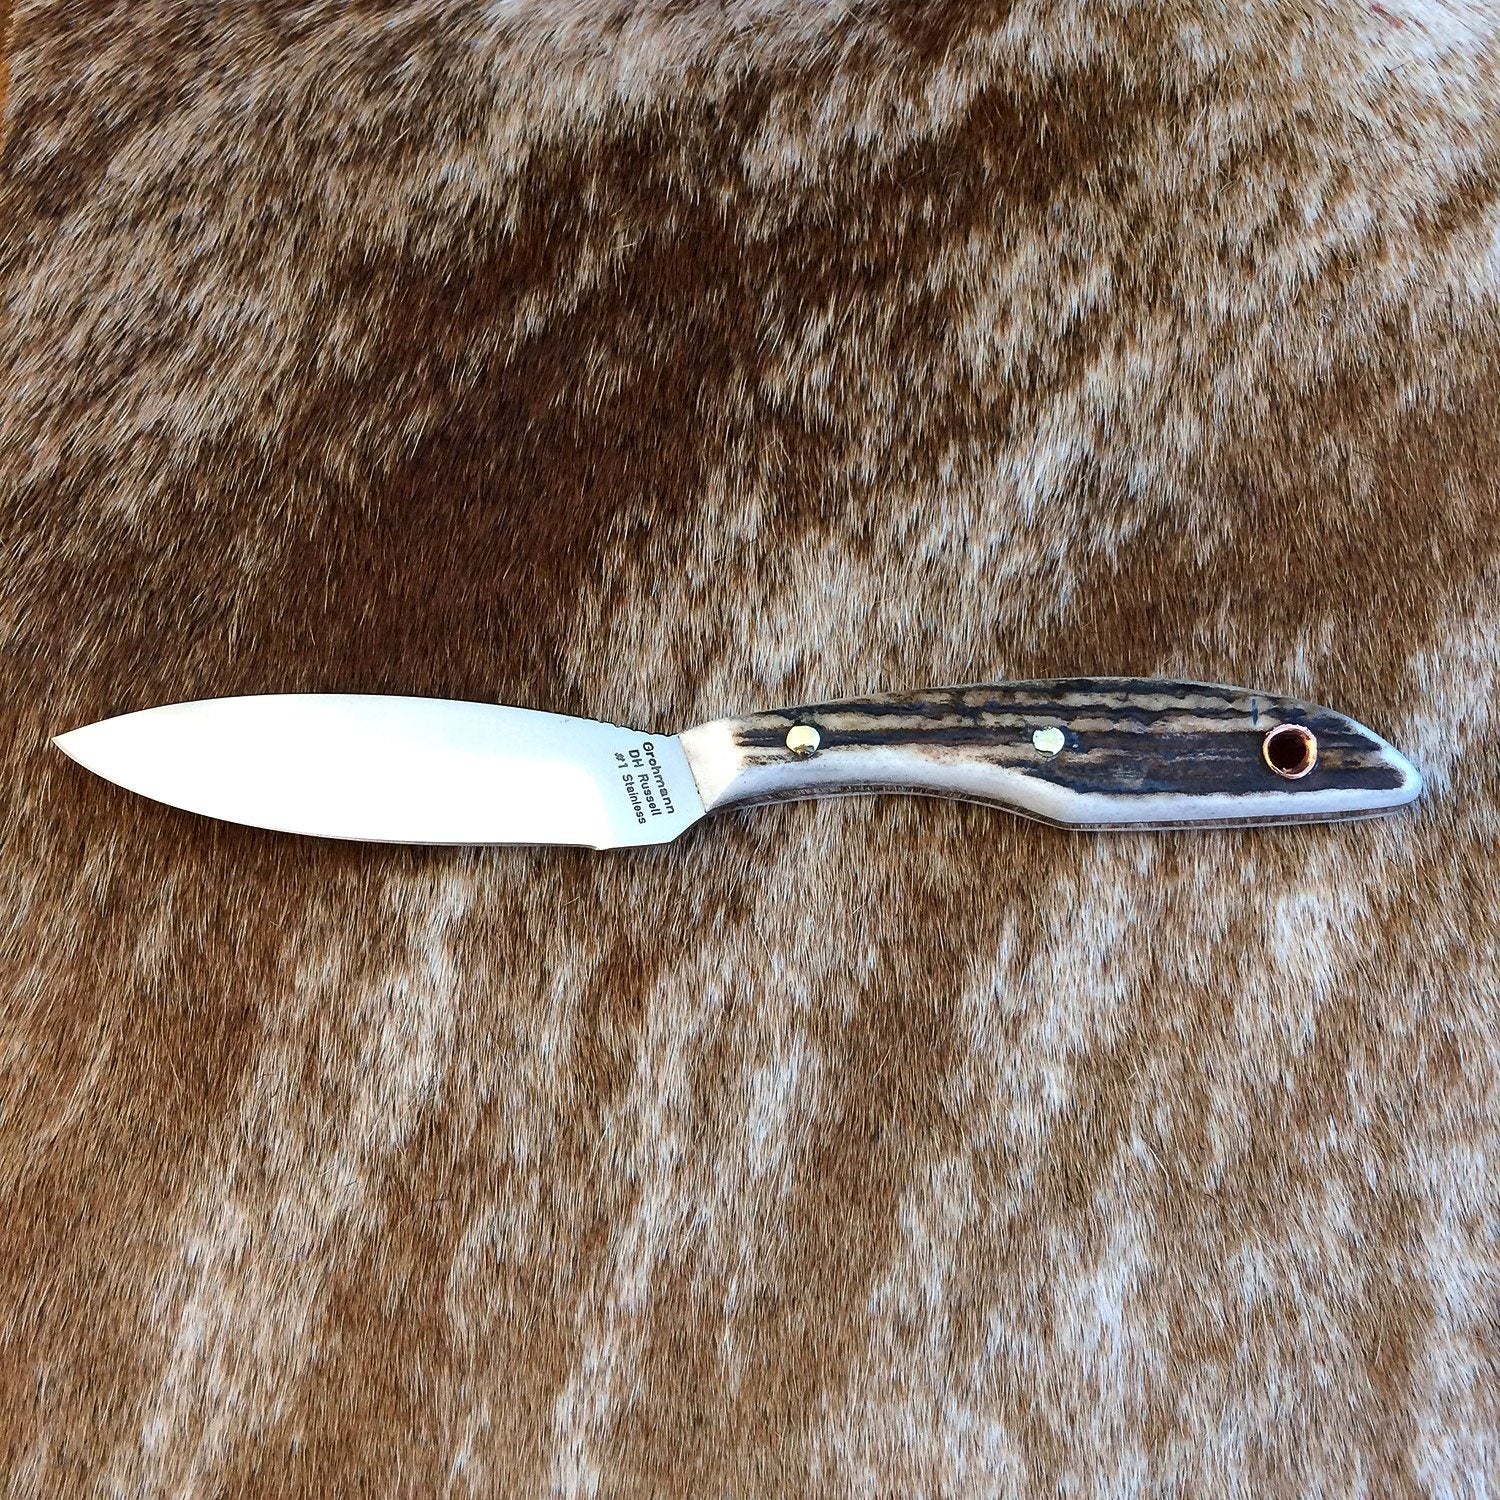 Grohmann D.H. Russell Belt Knife with Stag Horn Handle